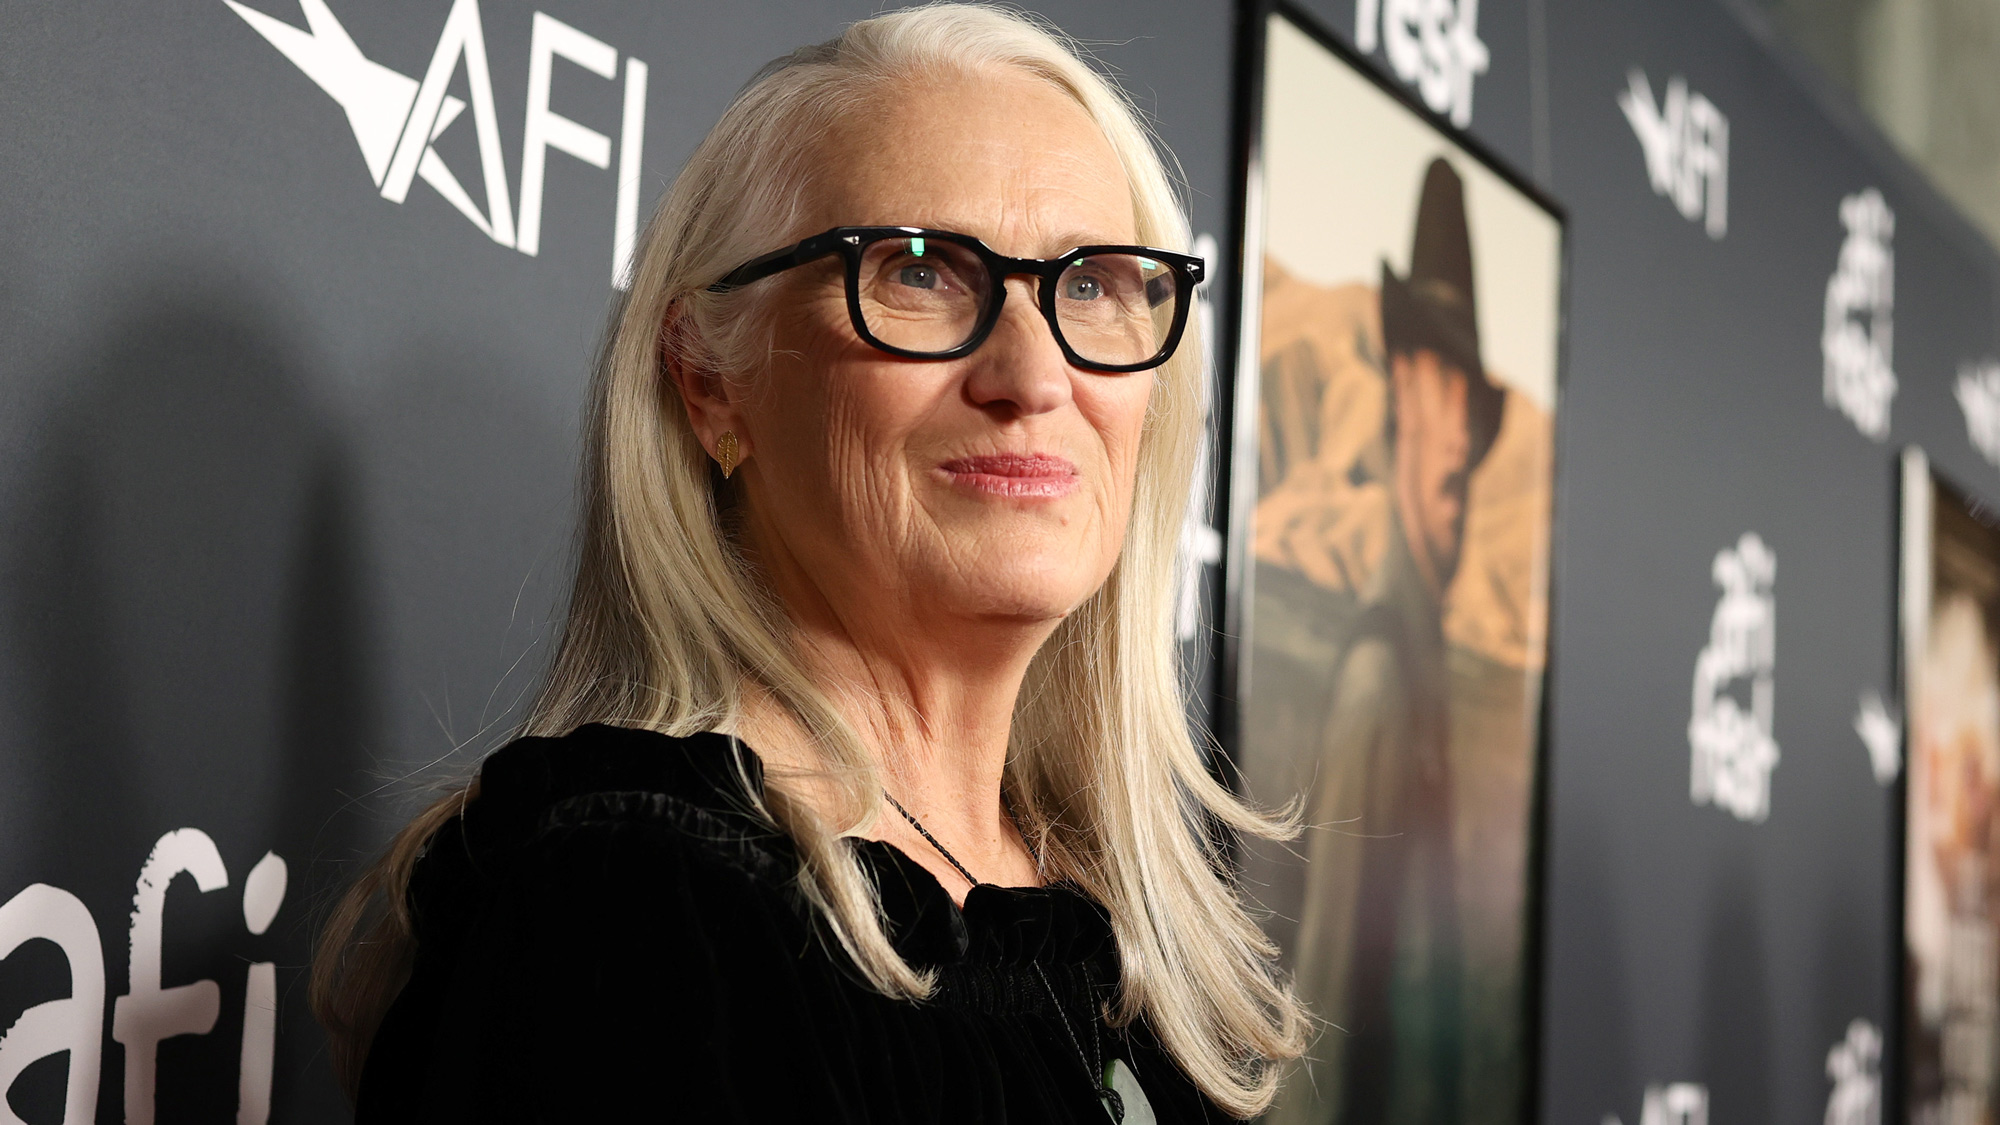 Jane Campion attends the official screening of Netflix's "The Power Of The Dog" during AFI Fest at TCL Chinese Theatre on November 11, 2021, in Hollywood, California. 